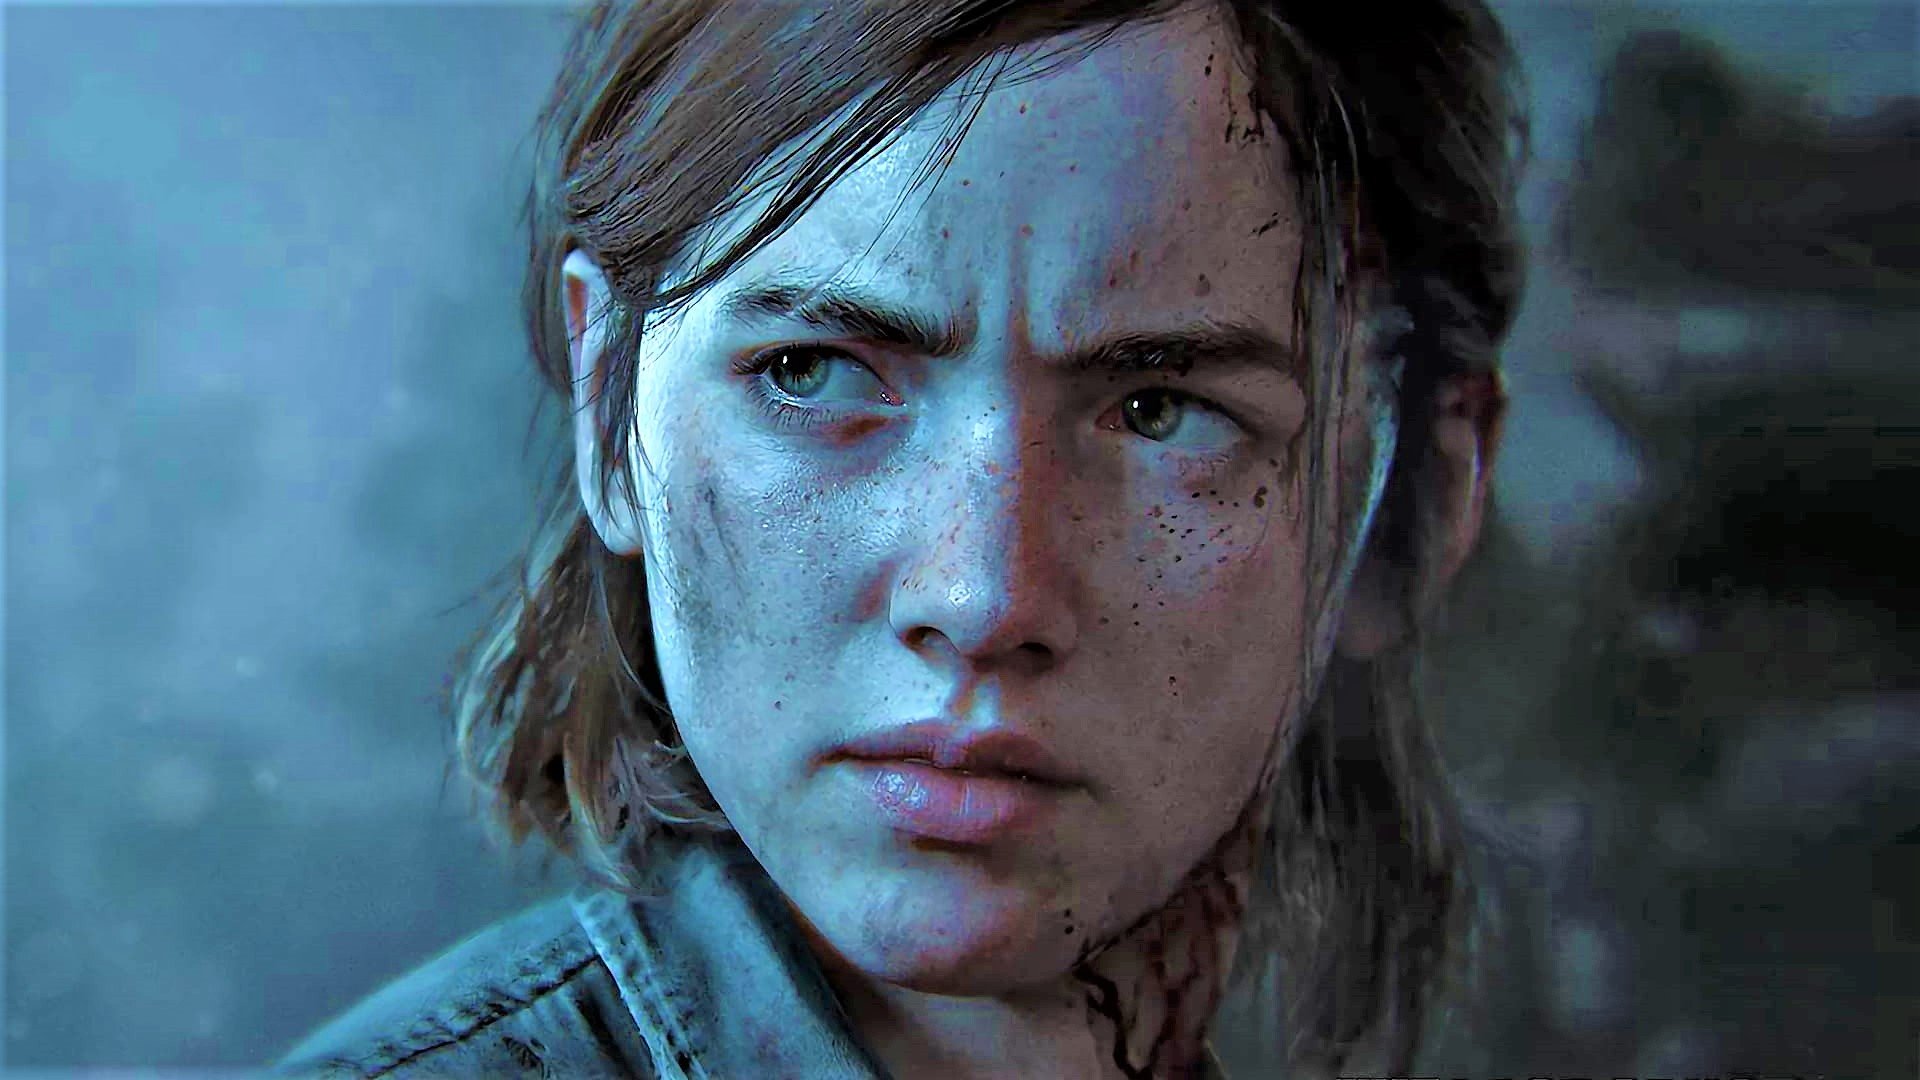 Review: The Last of Us 2